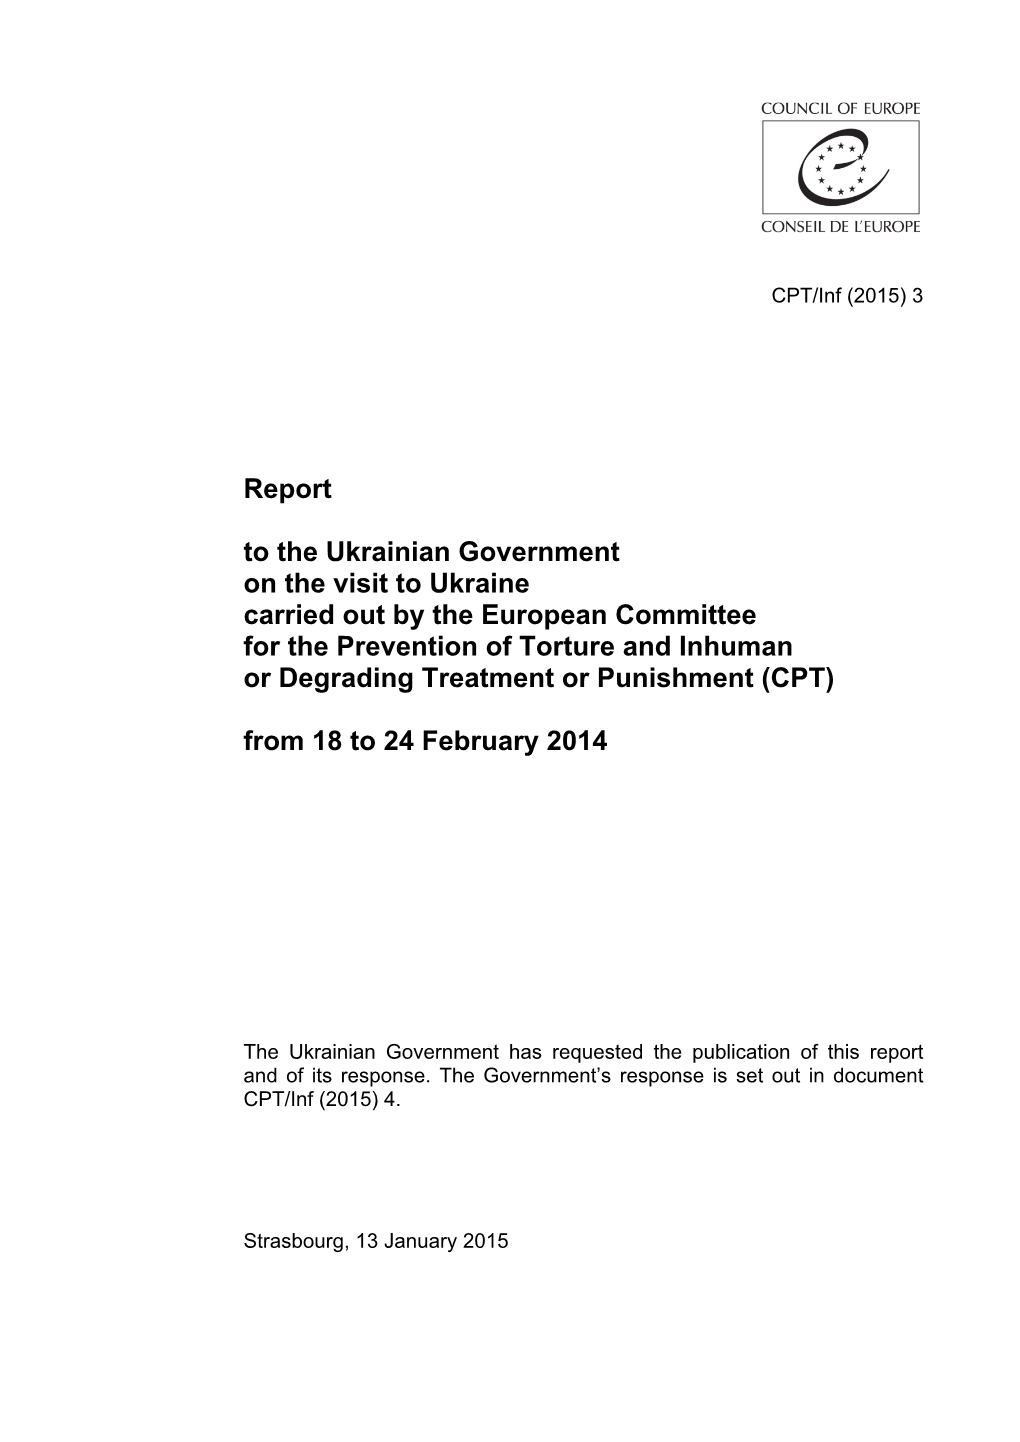 Report to the Ukrainian Government on the Visit to Ukraine Carried